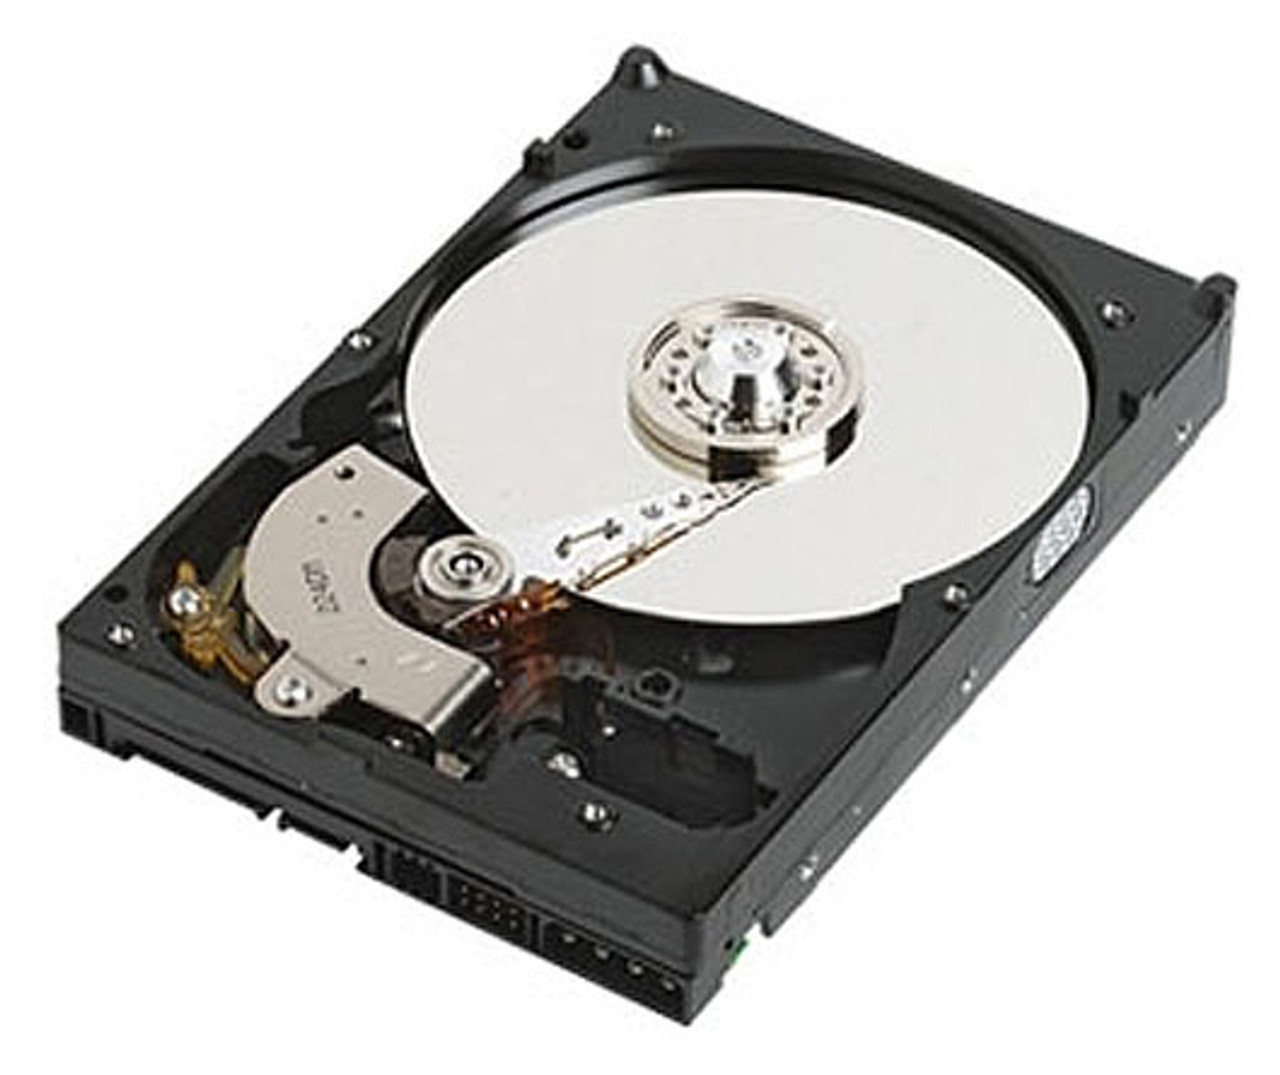 81Y9793 - IBM 1TB 7200RPM NL SATA 6GB/s 3.5-inch G2 Hot Swapable Hard Drive with Tray